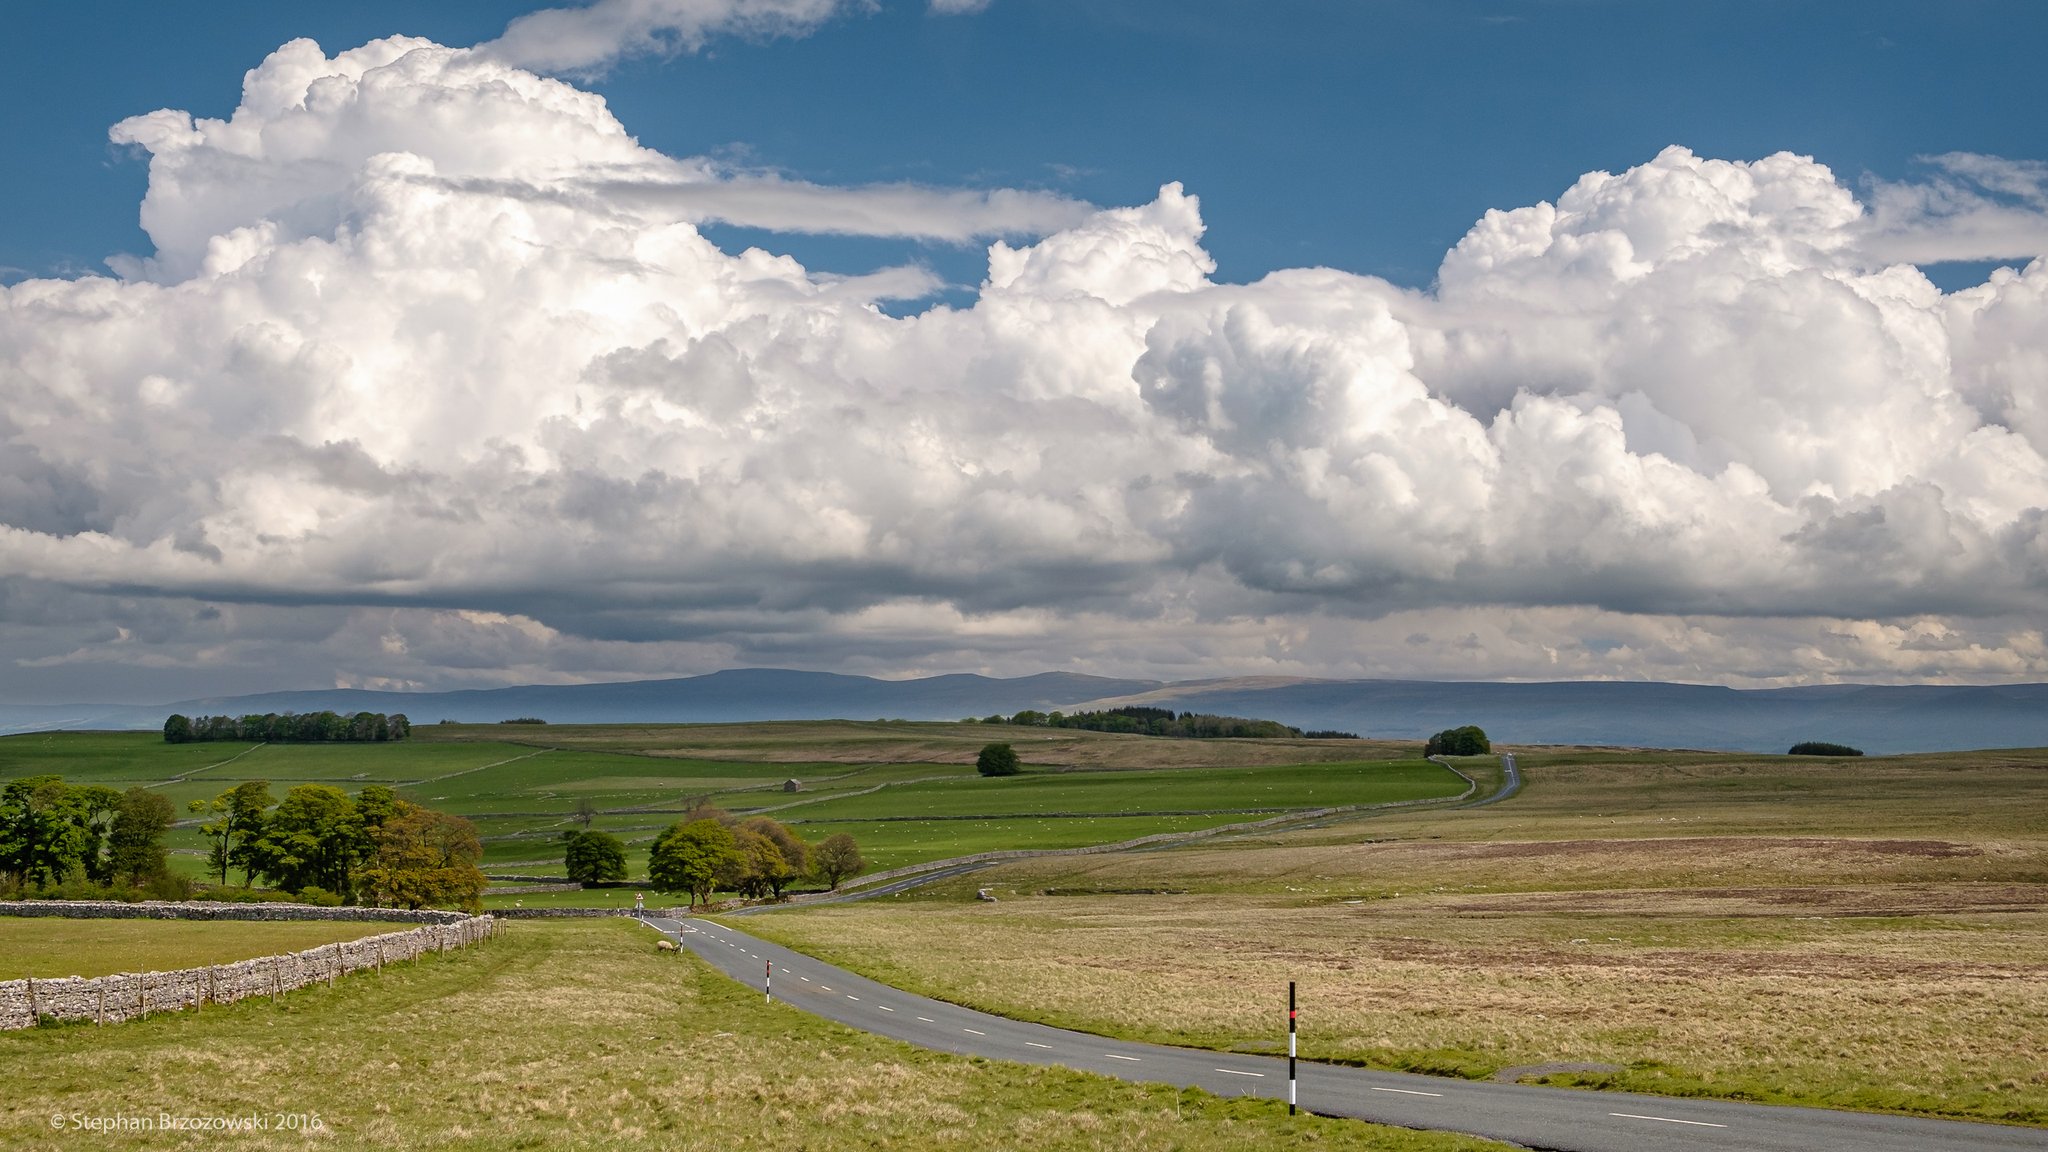 1st Place Cumulus clouds dwarfing the highest fells of the North Pennines, seen from Orton Scar in Cumbria by Stephan Brzozowski @stephanbrz